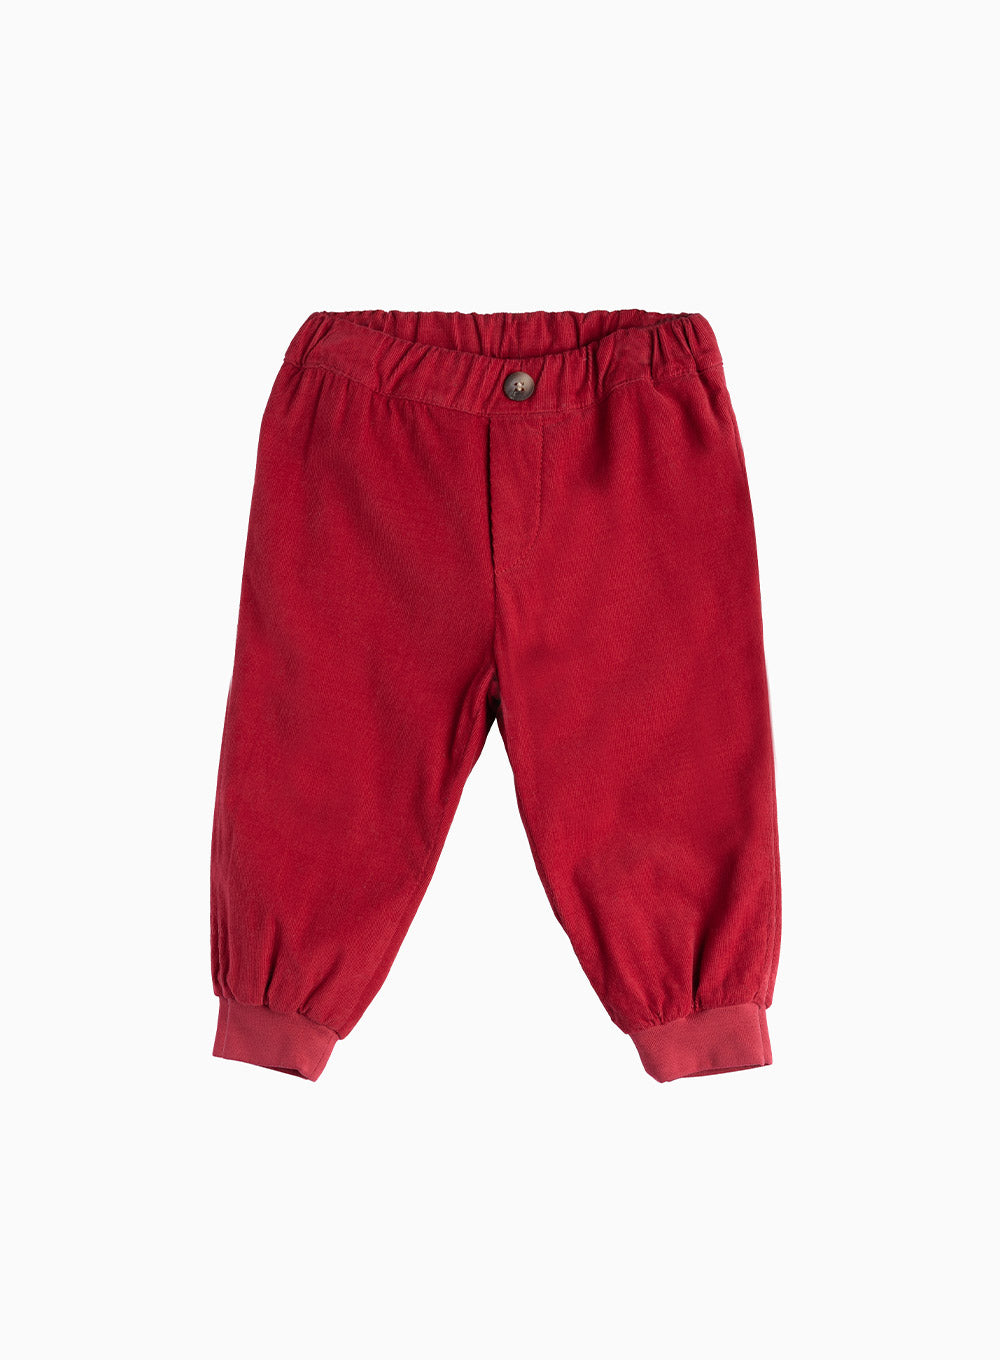 Baby Orly Pants in Deep Red